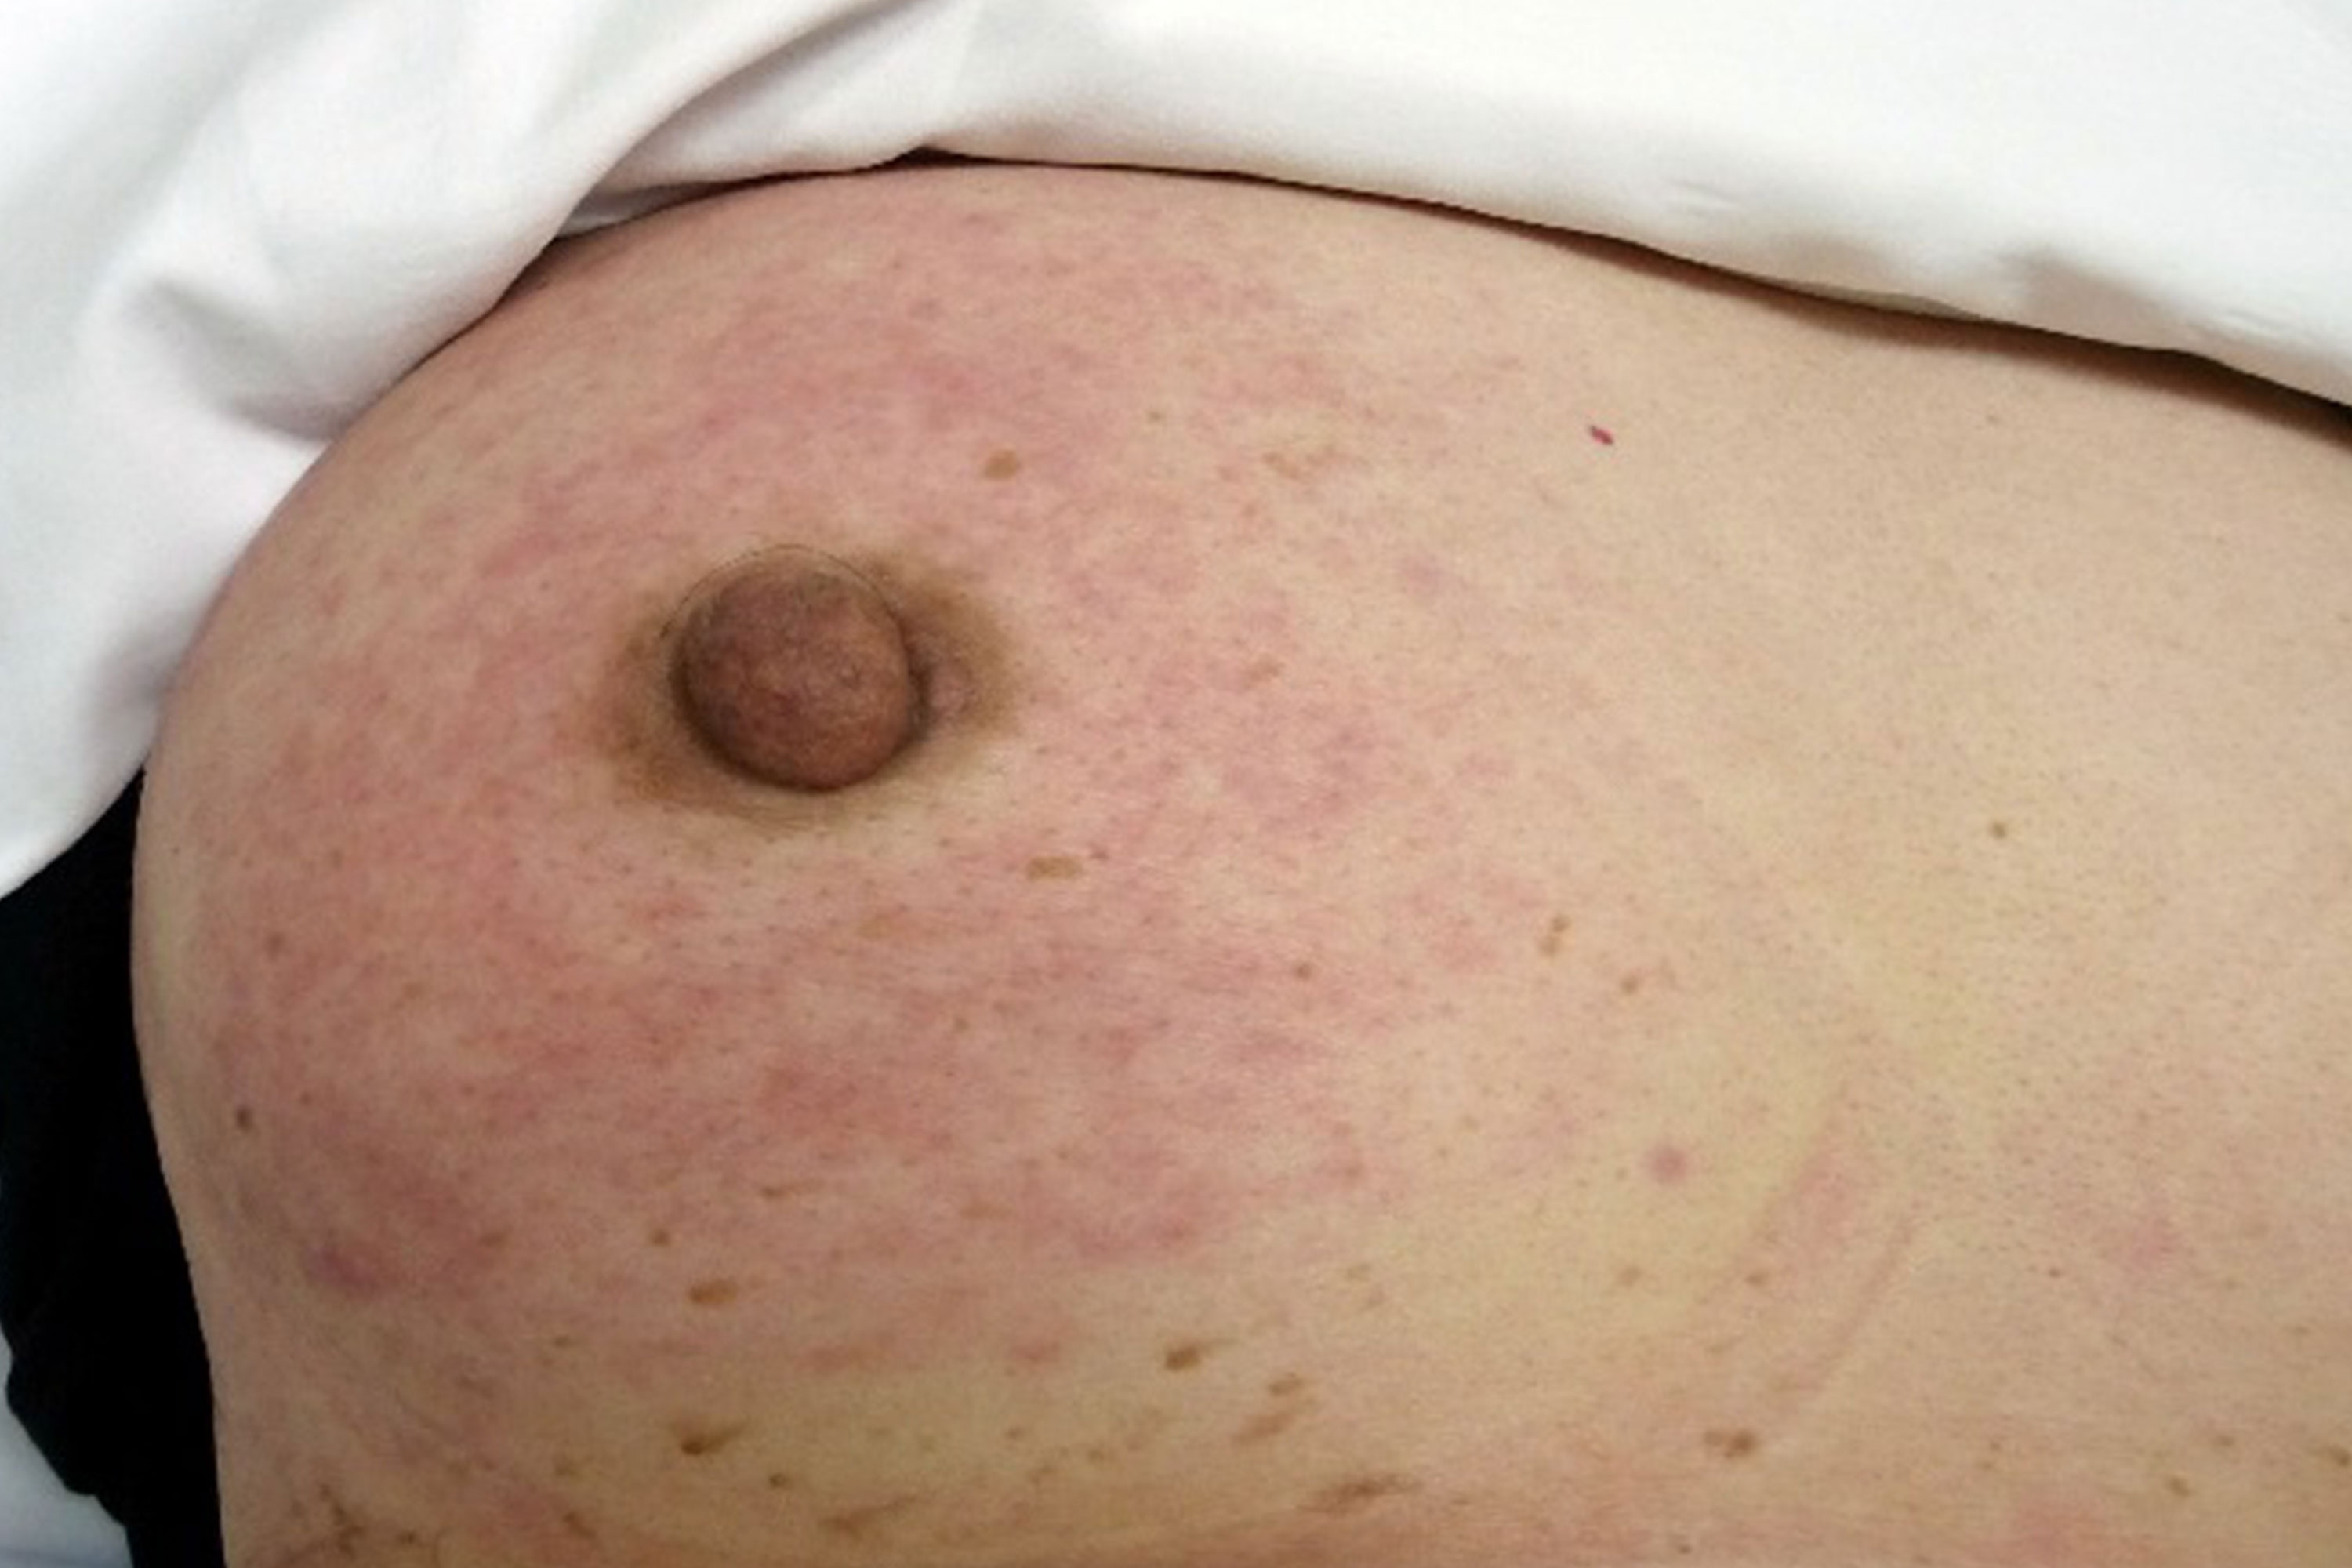 The Rash From This Woman's Bra Turned Out To Be Stage 4 Breast Cancer